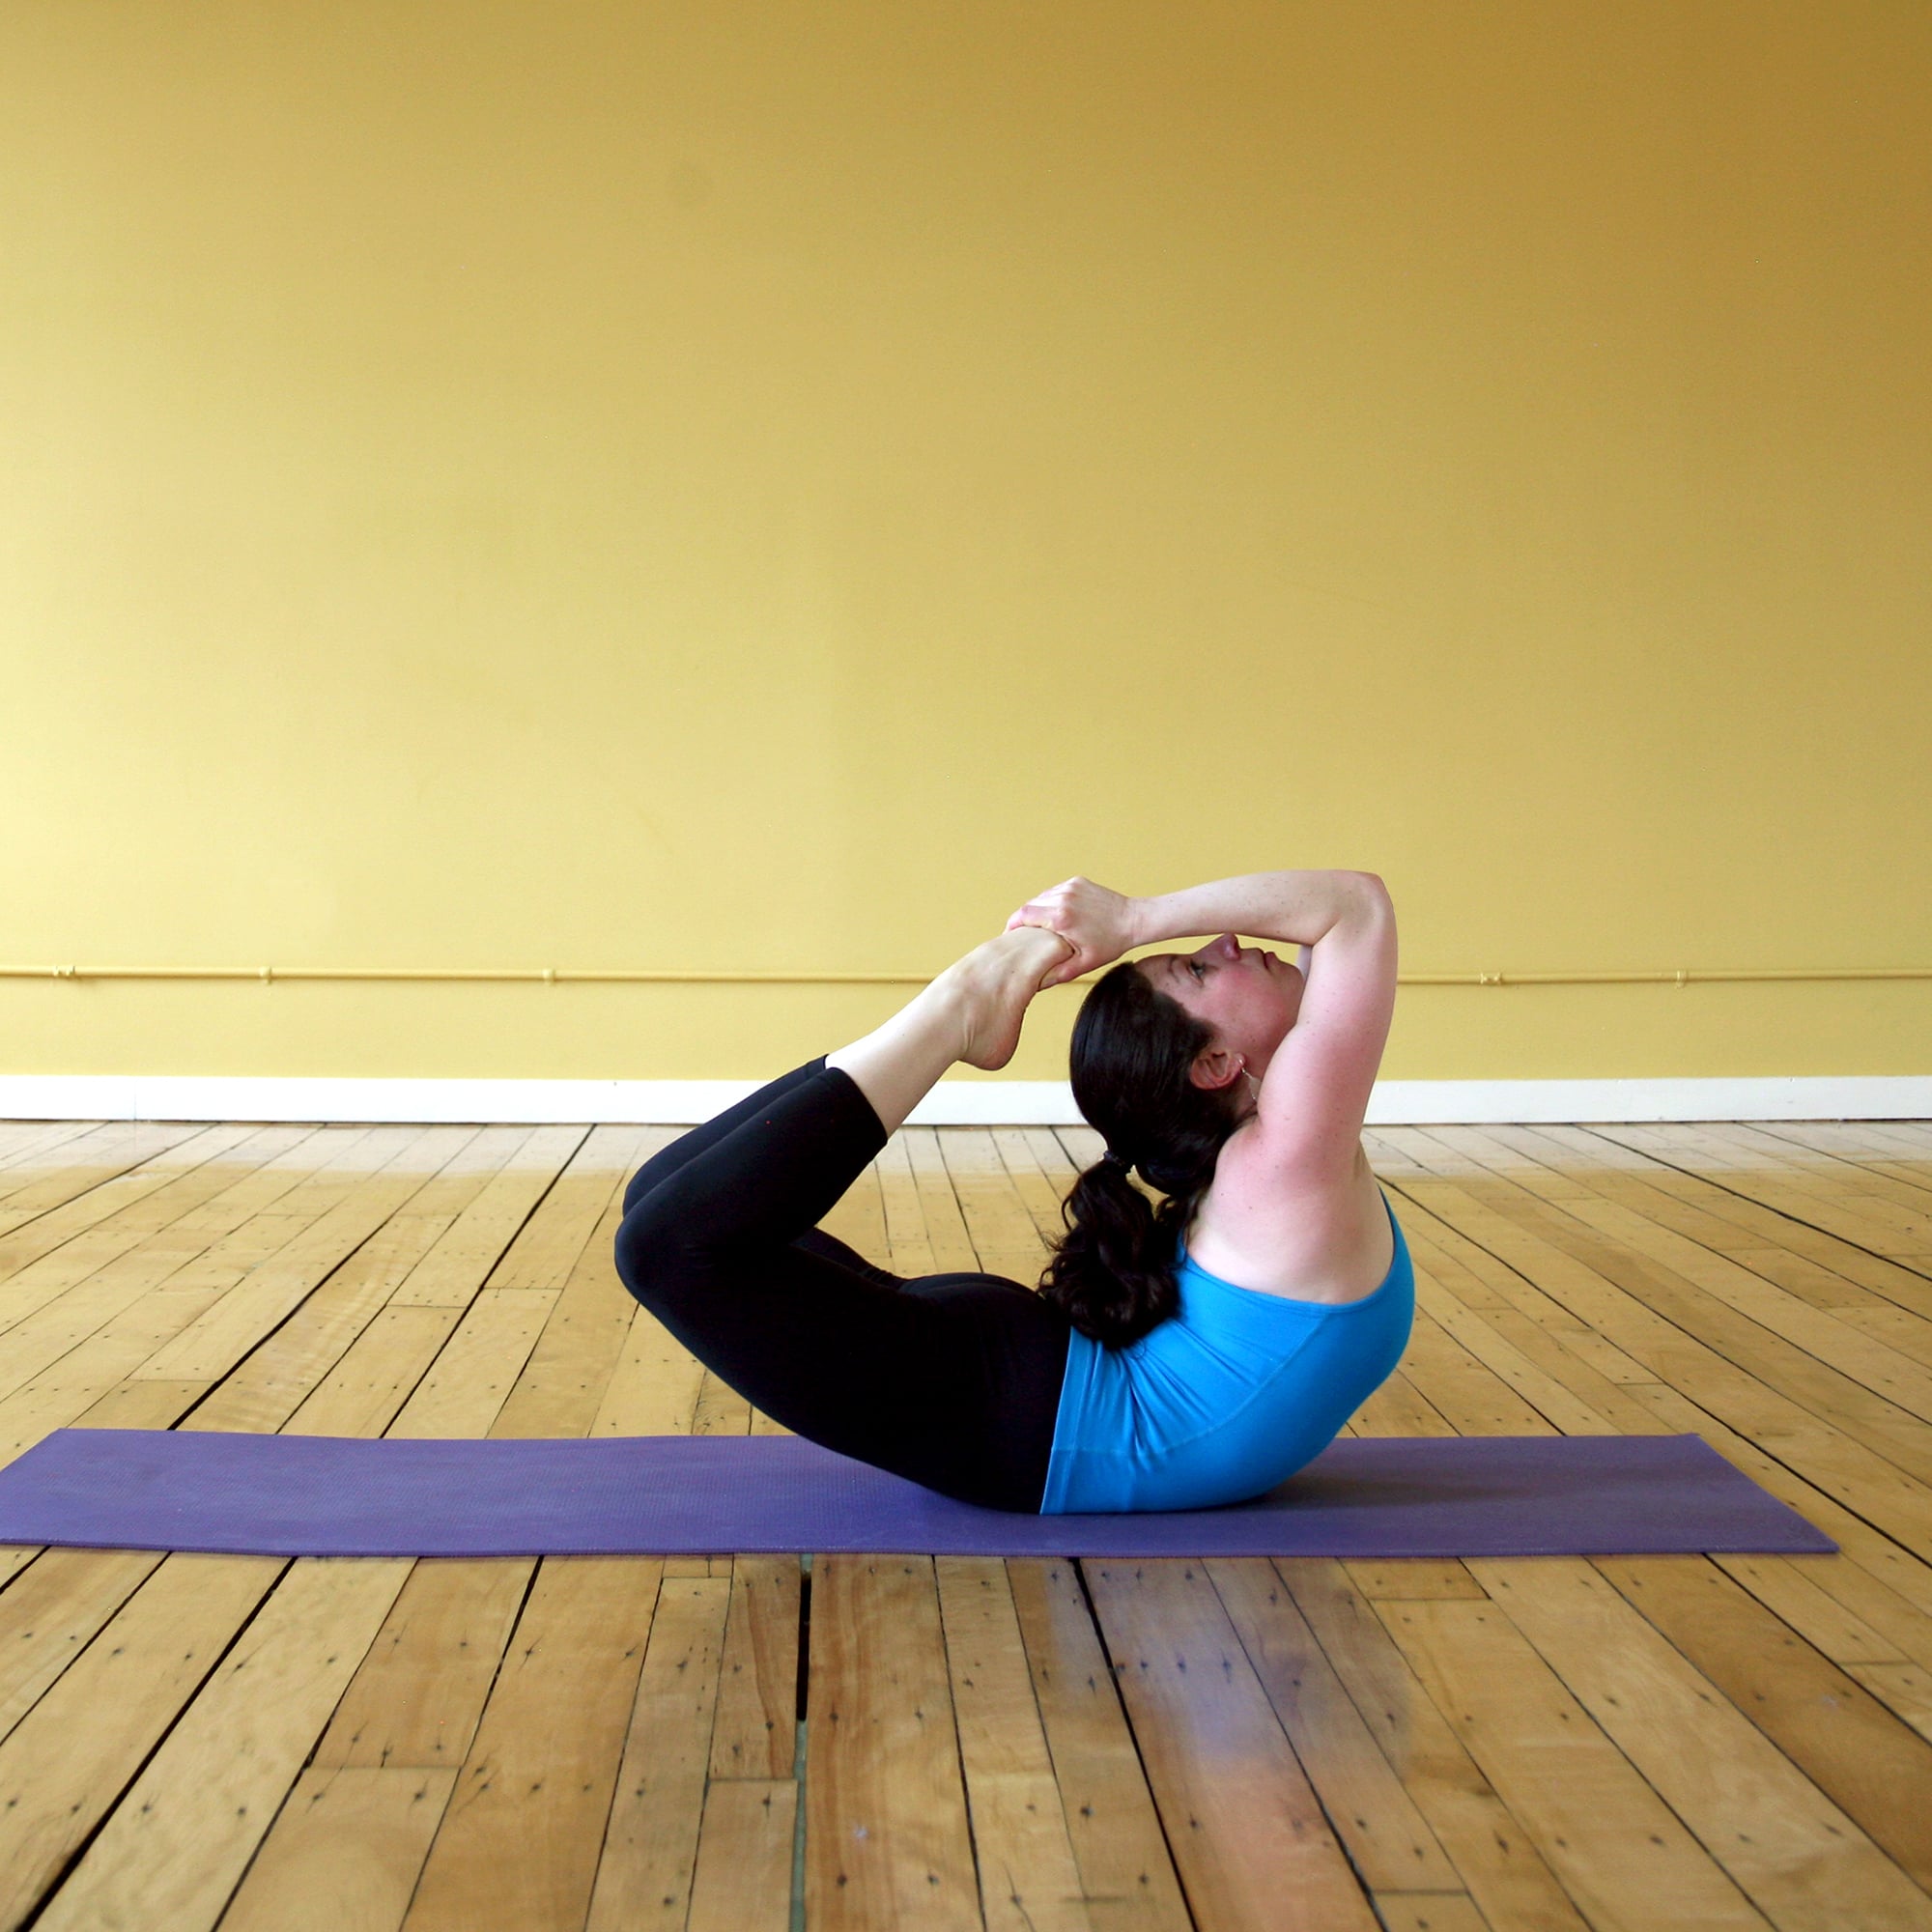 Advanced Yoga Poses, Pictures